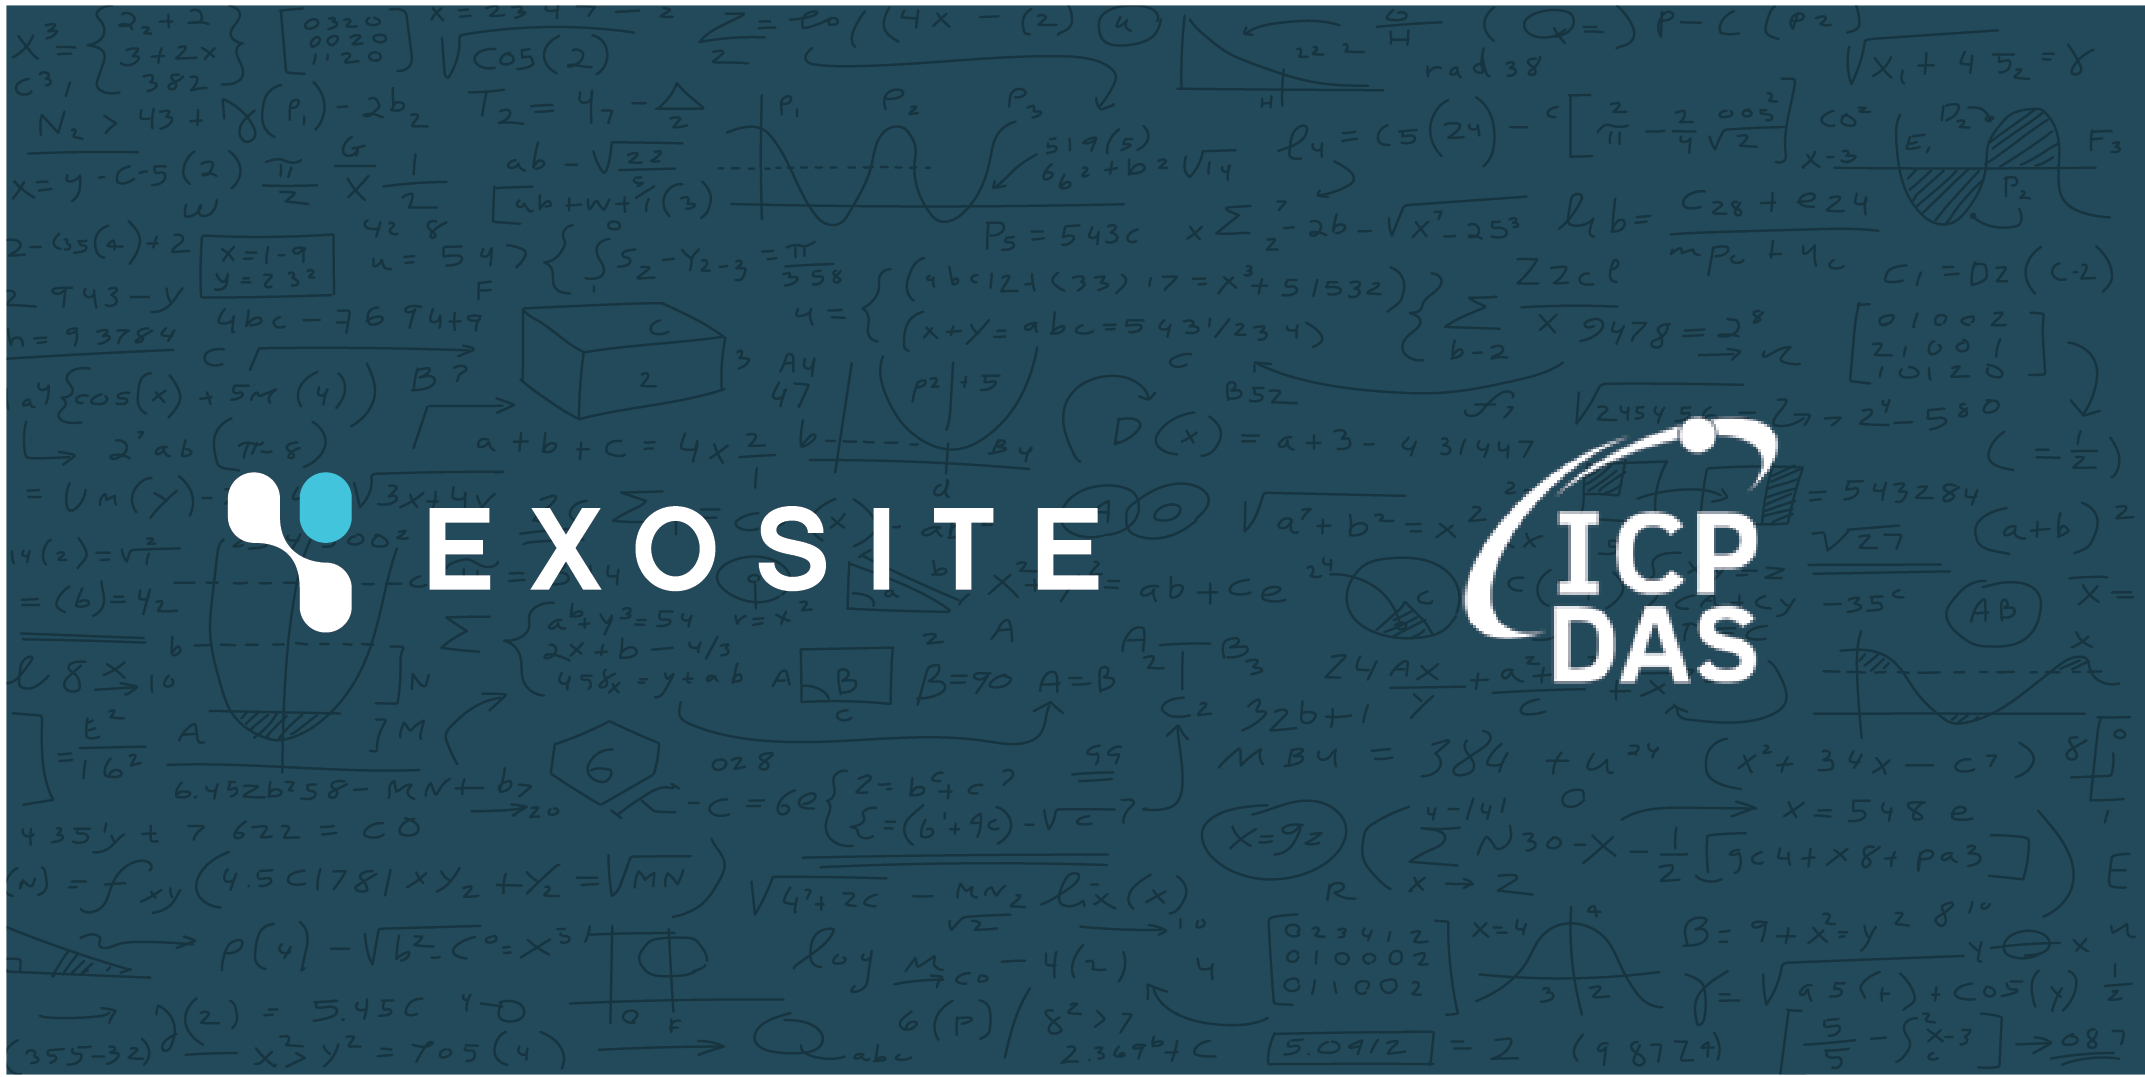 Exosite and ICP DAS Announce Partnership to Bring ExoWISE Software Solution to Market